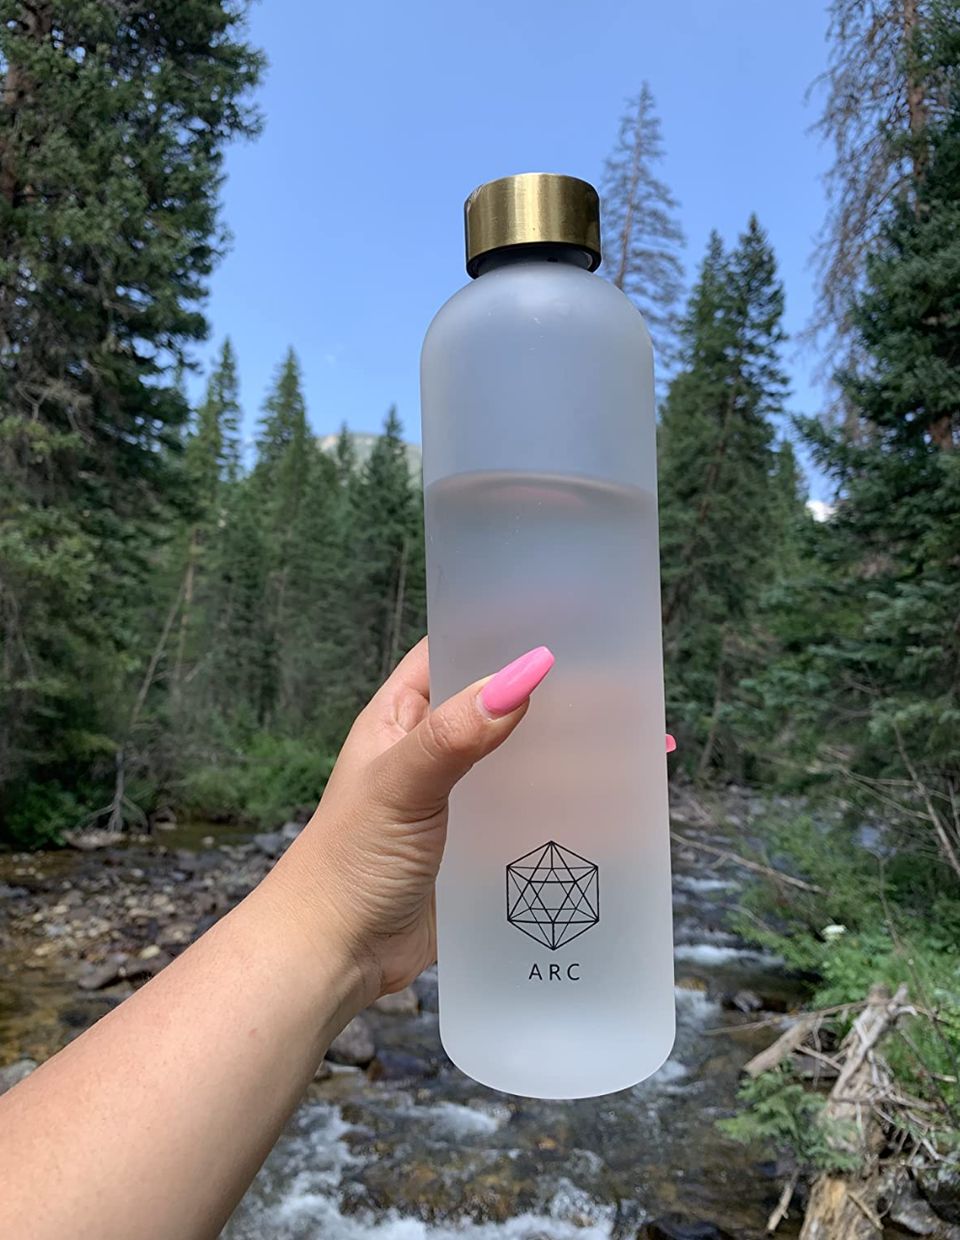 A sleek time-marked water bottle that is both lightweight and motivational